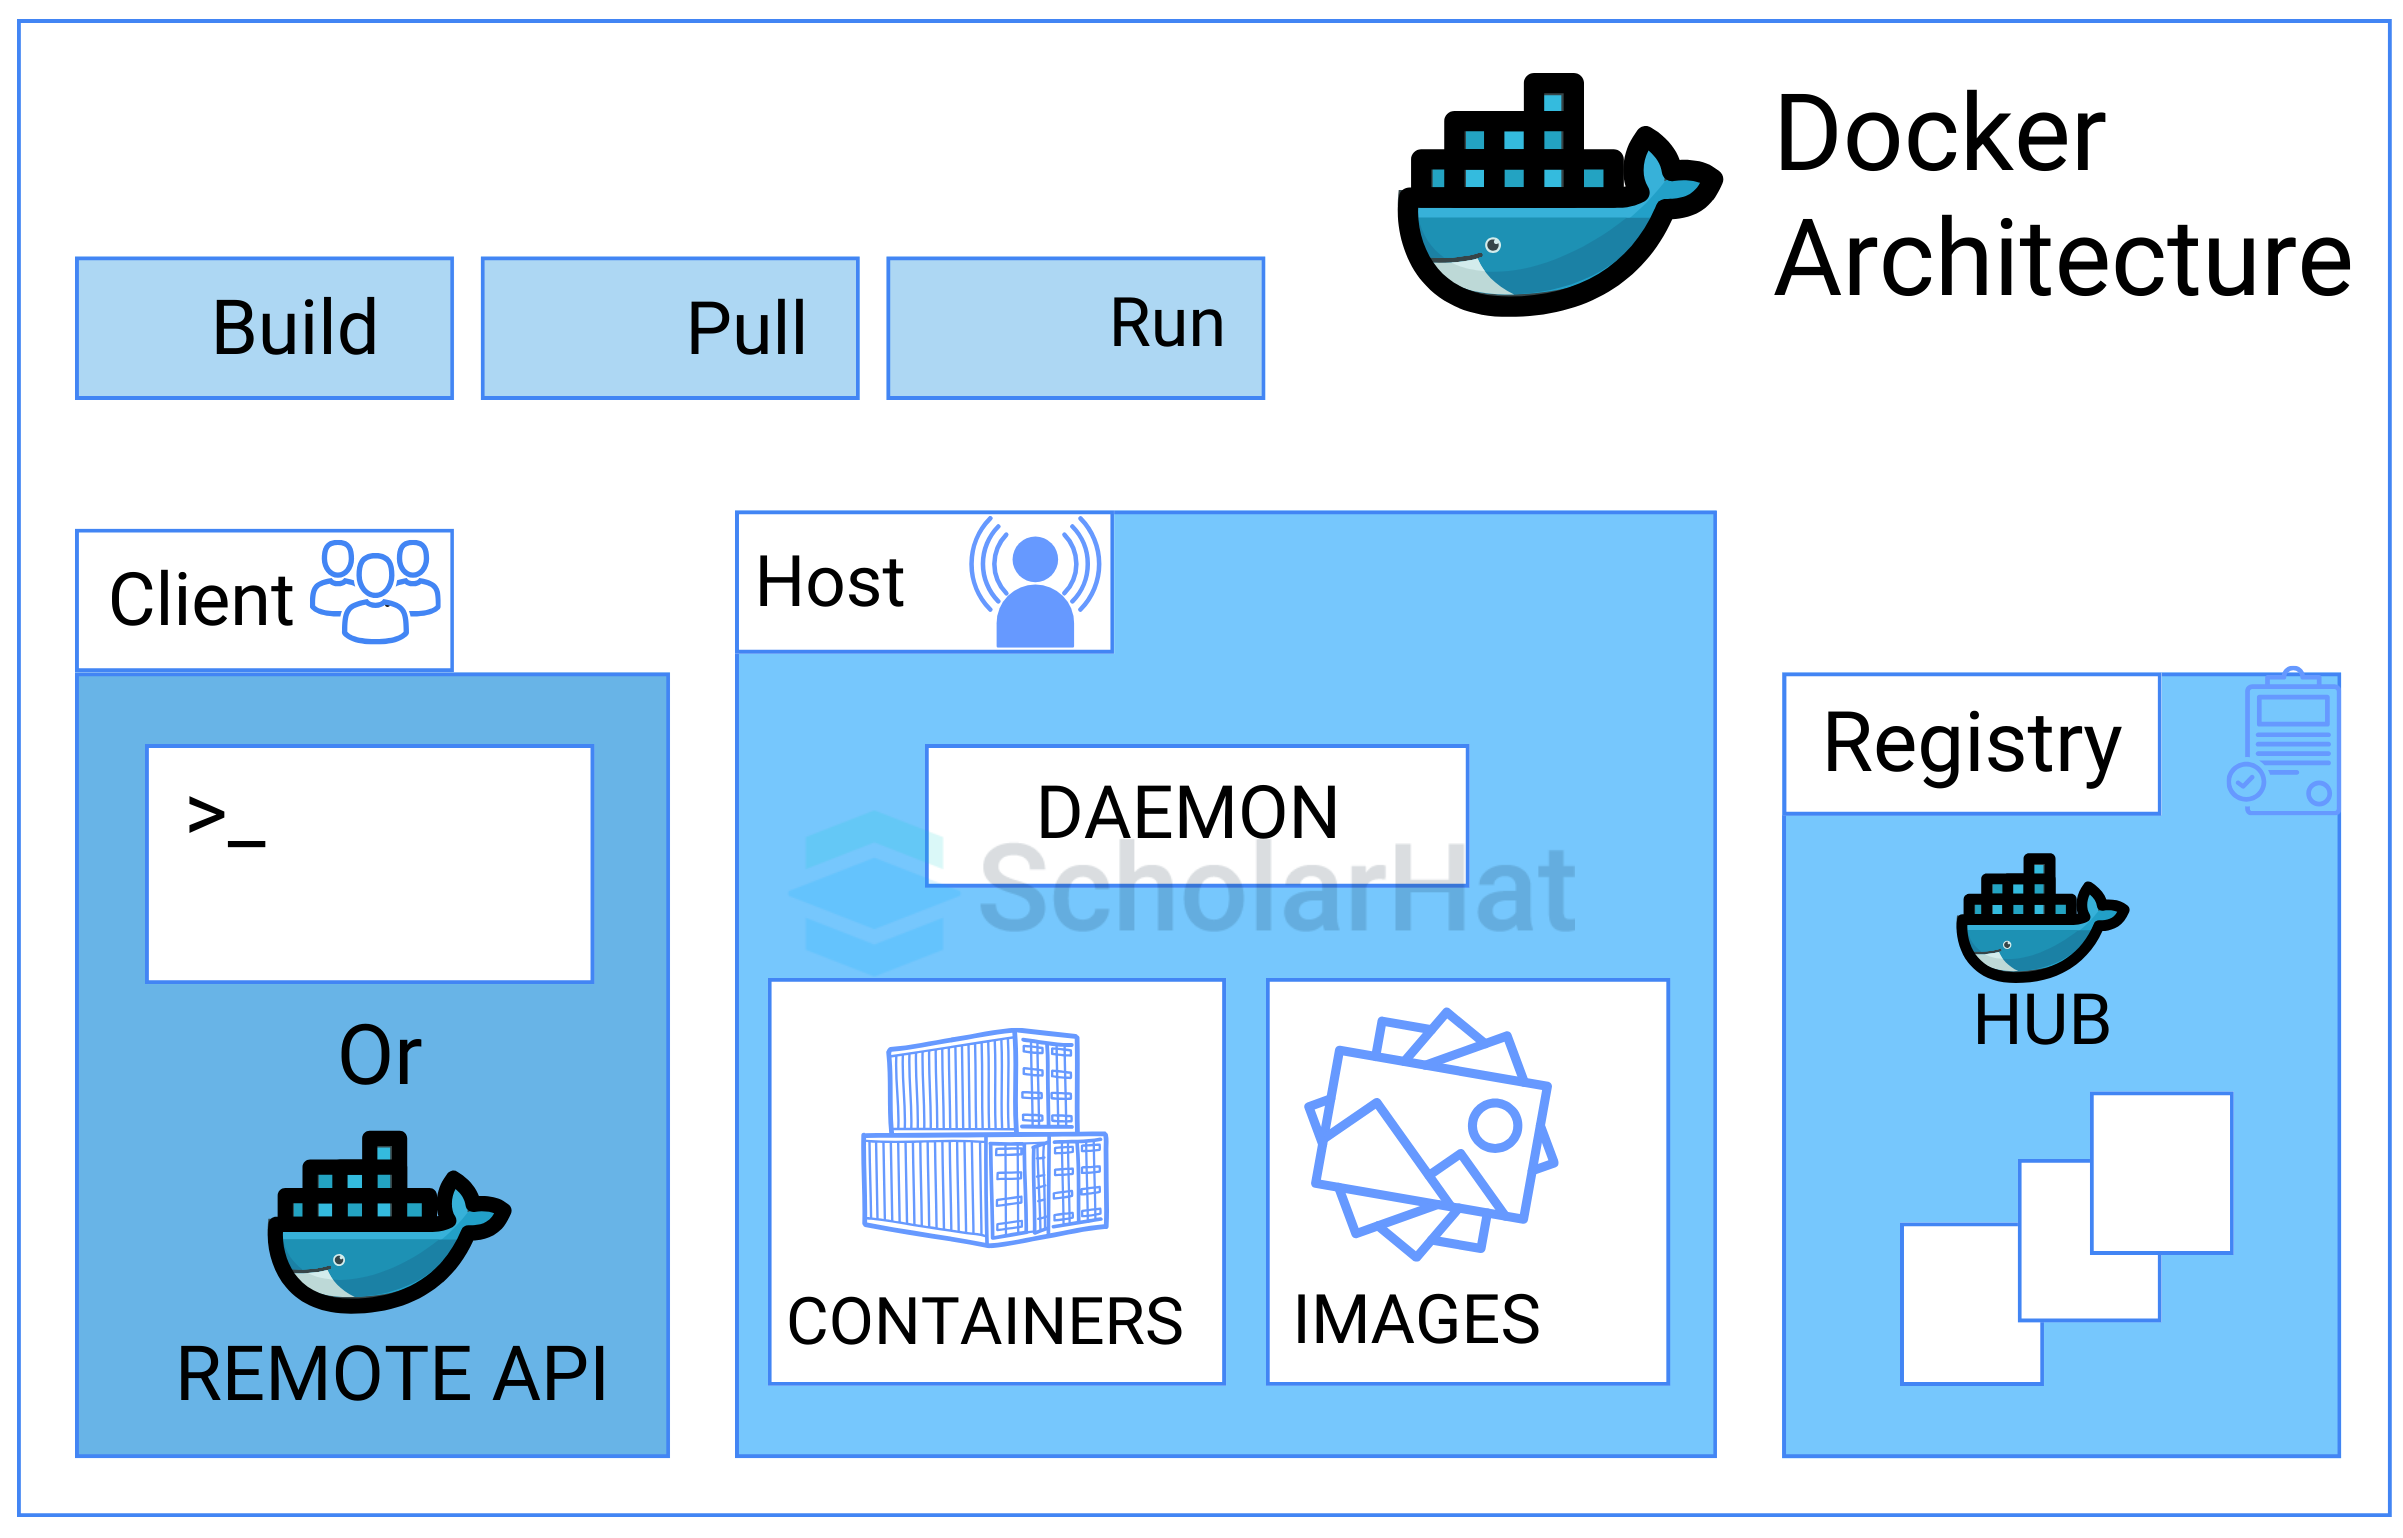 Describe the components of Docker Architecture.